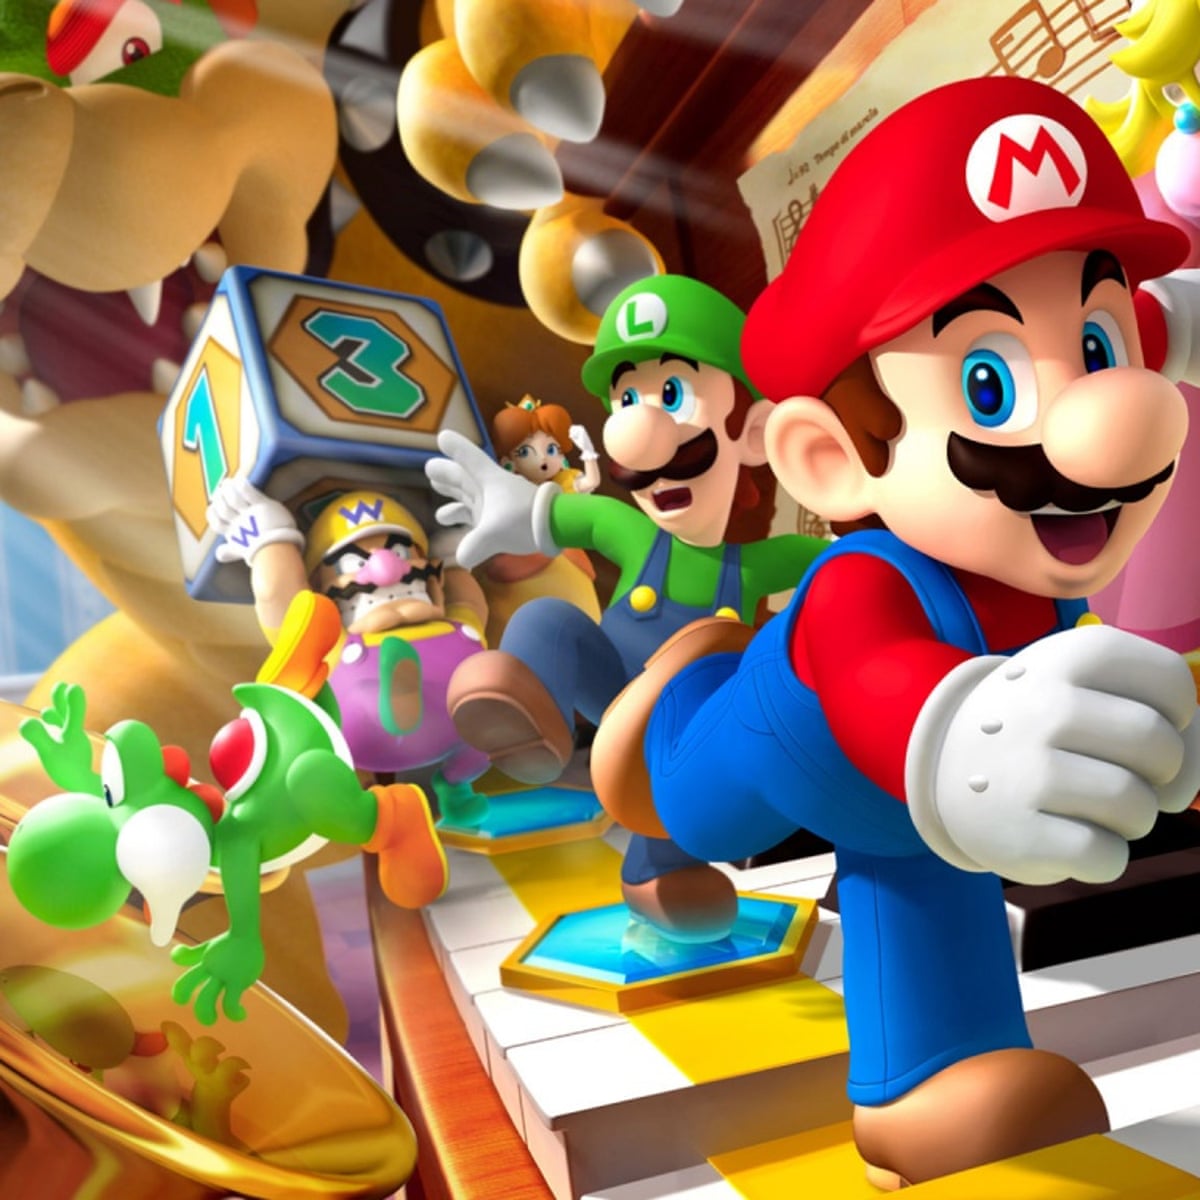 Plumbing the depths: why Hollywood should give up on making a Super Mario movie